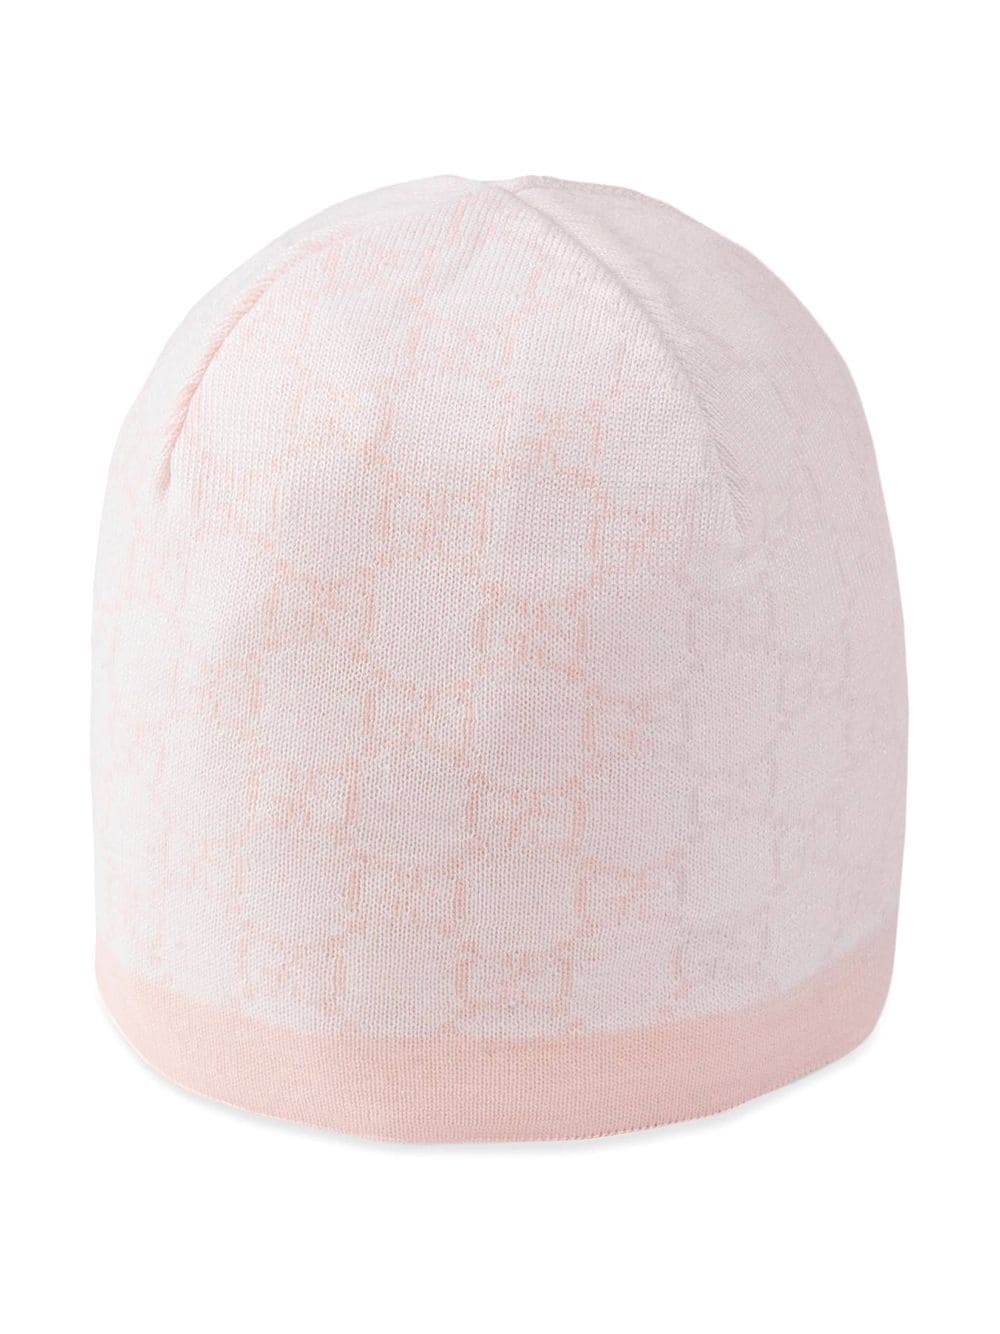 Pink and ivory hat for baby girls